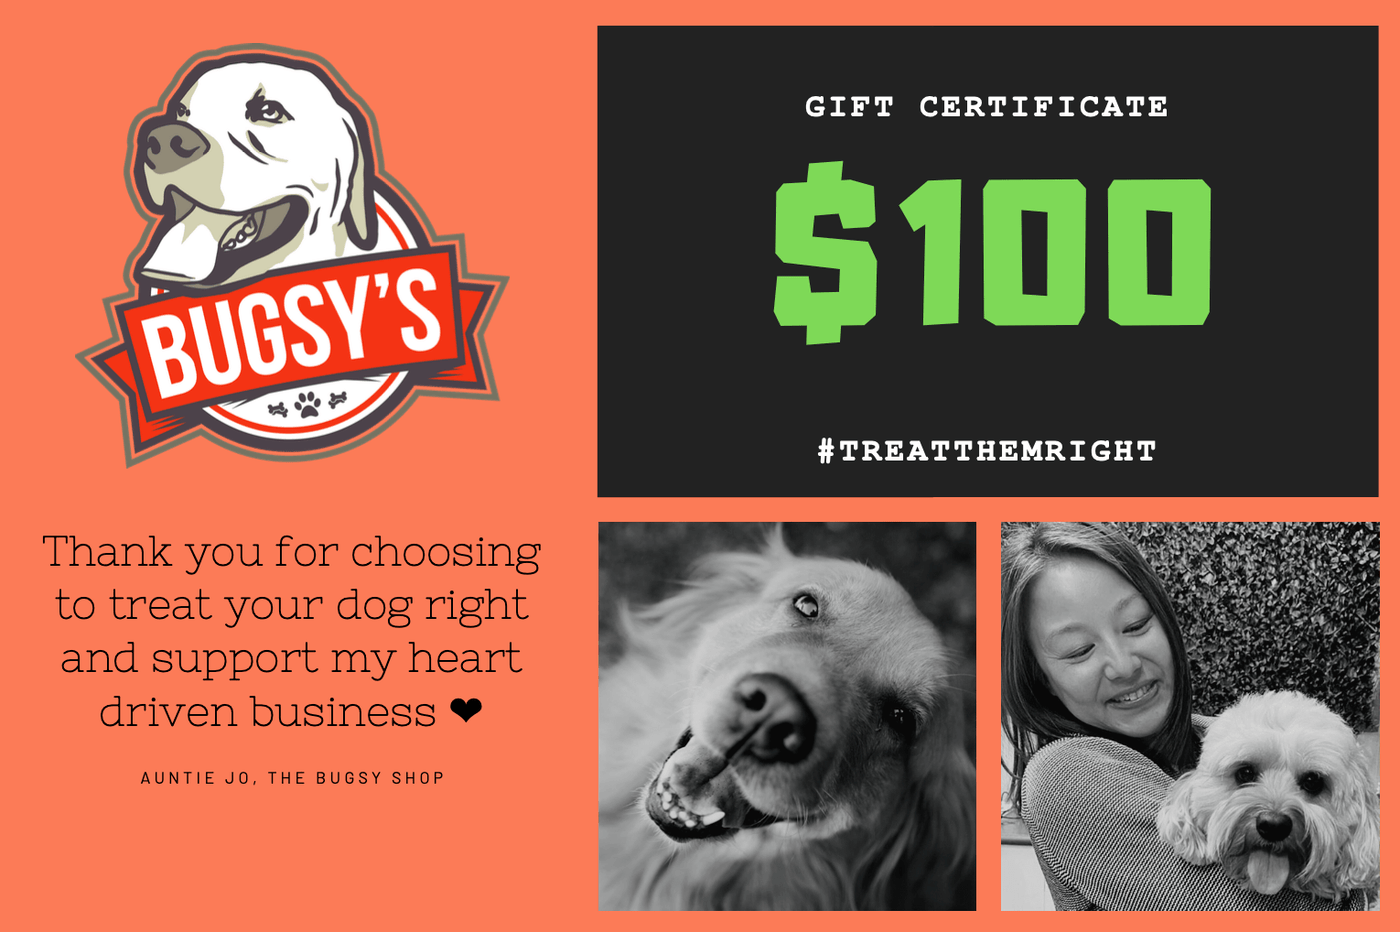 BUGSY'S GIFT CERTIFICATES